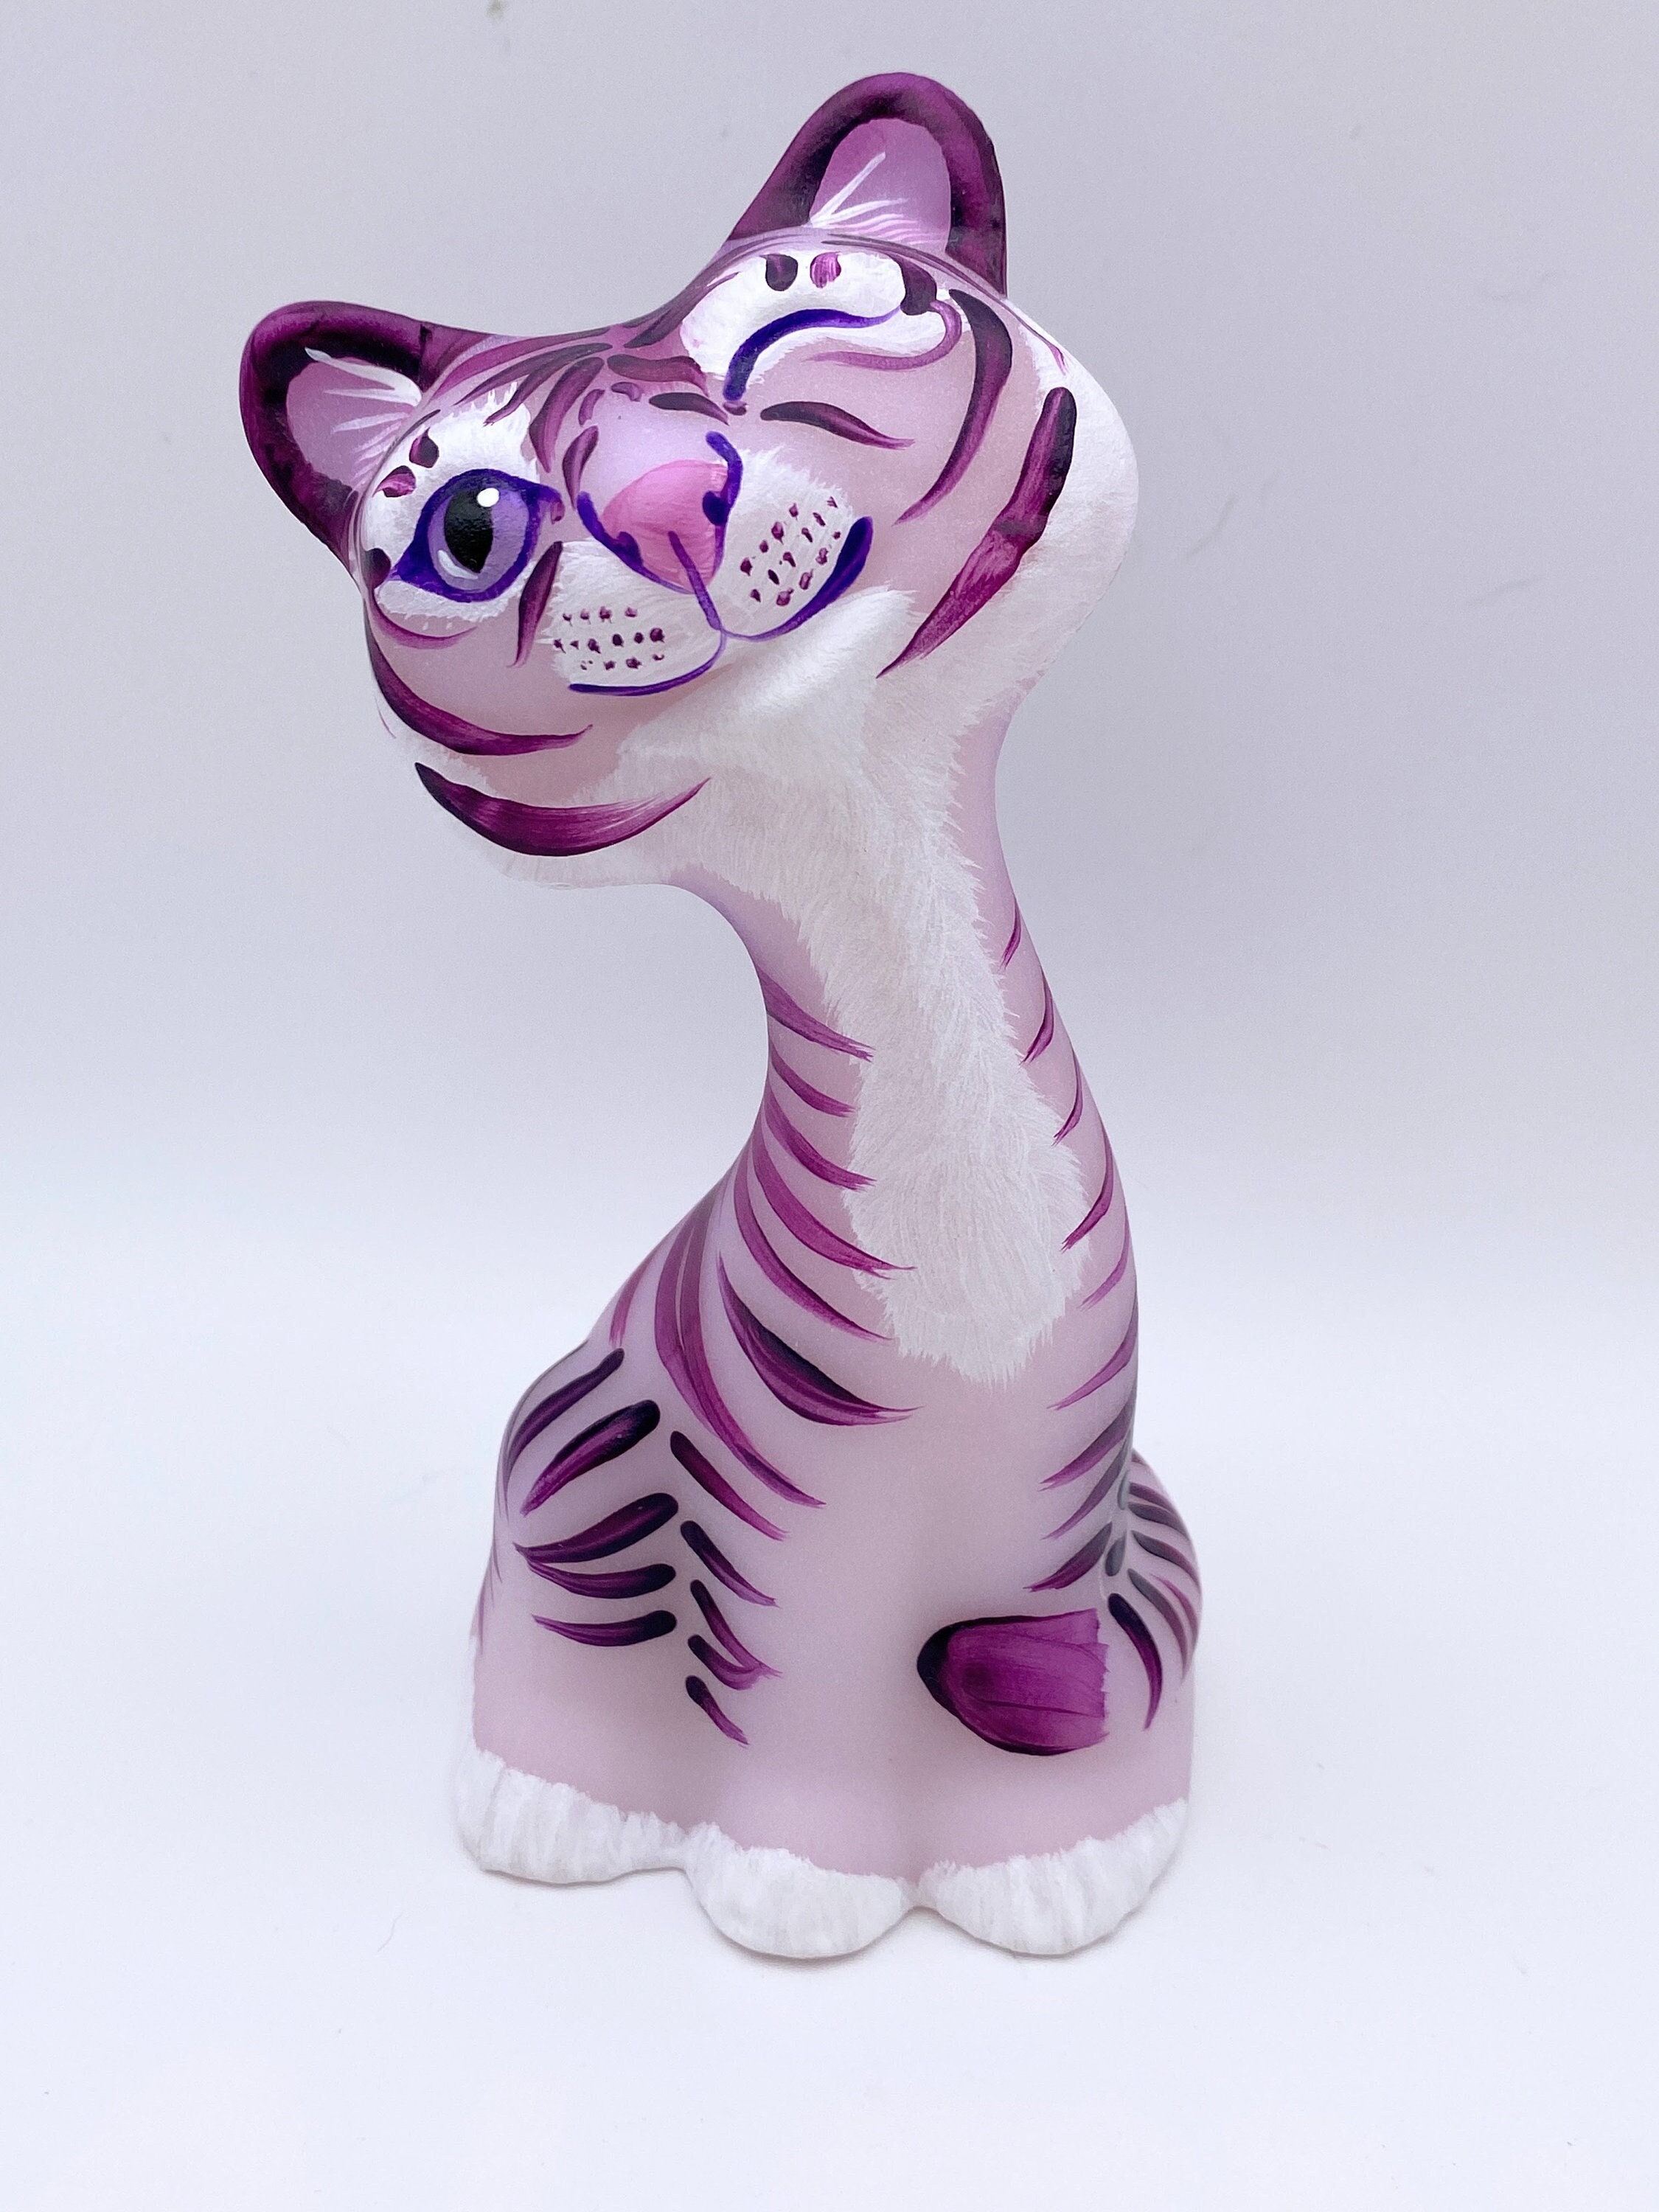 Fenton Rare HP Blue Satin Sitting Cat with Purple and White